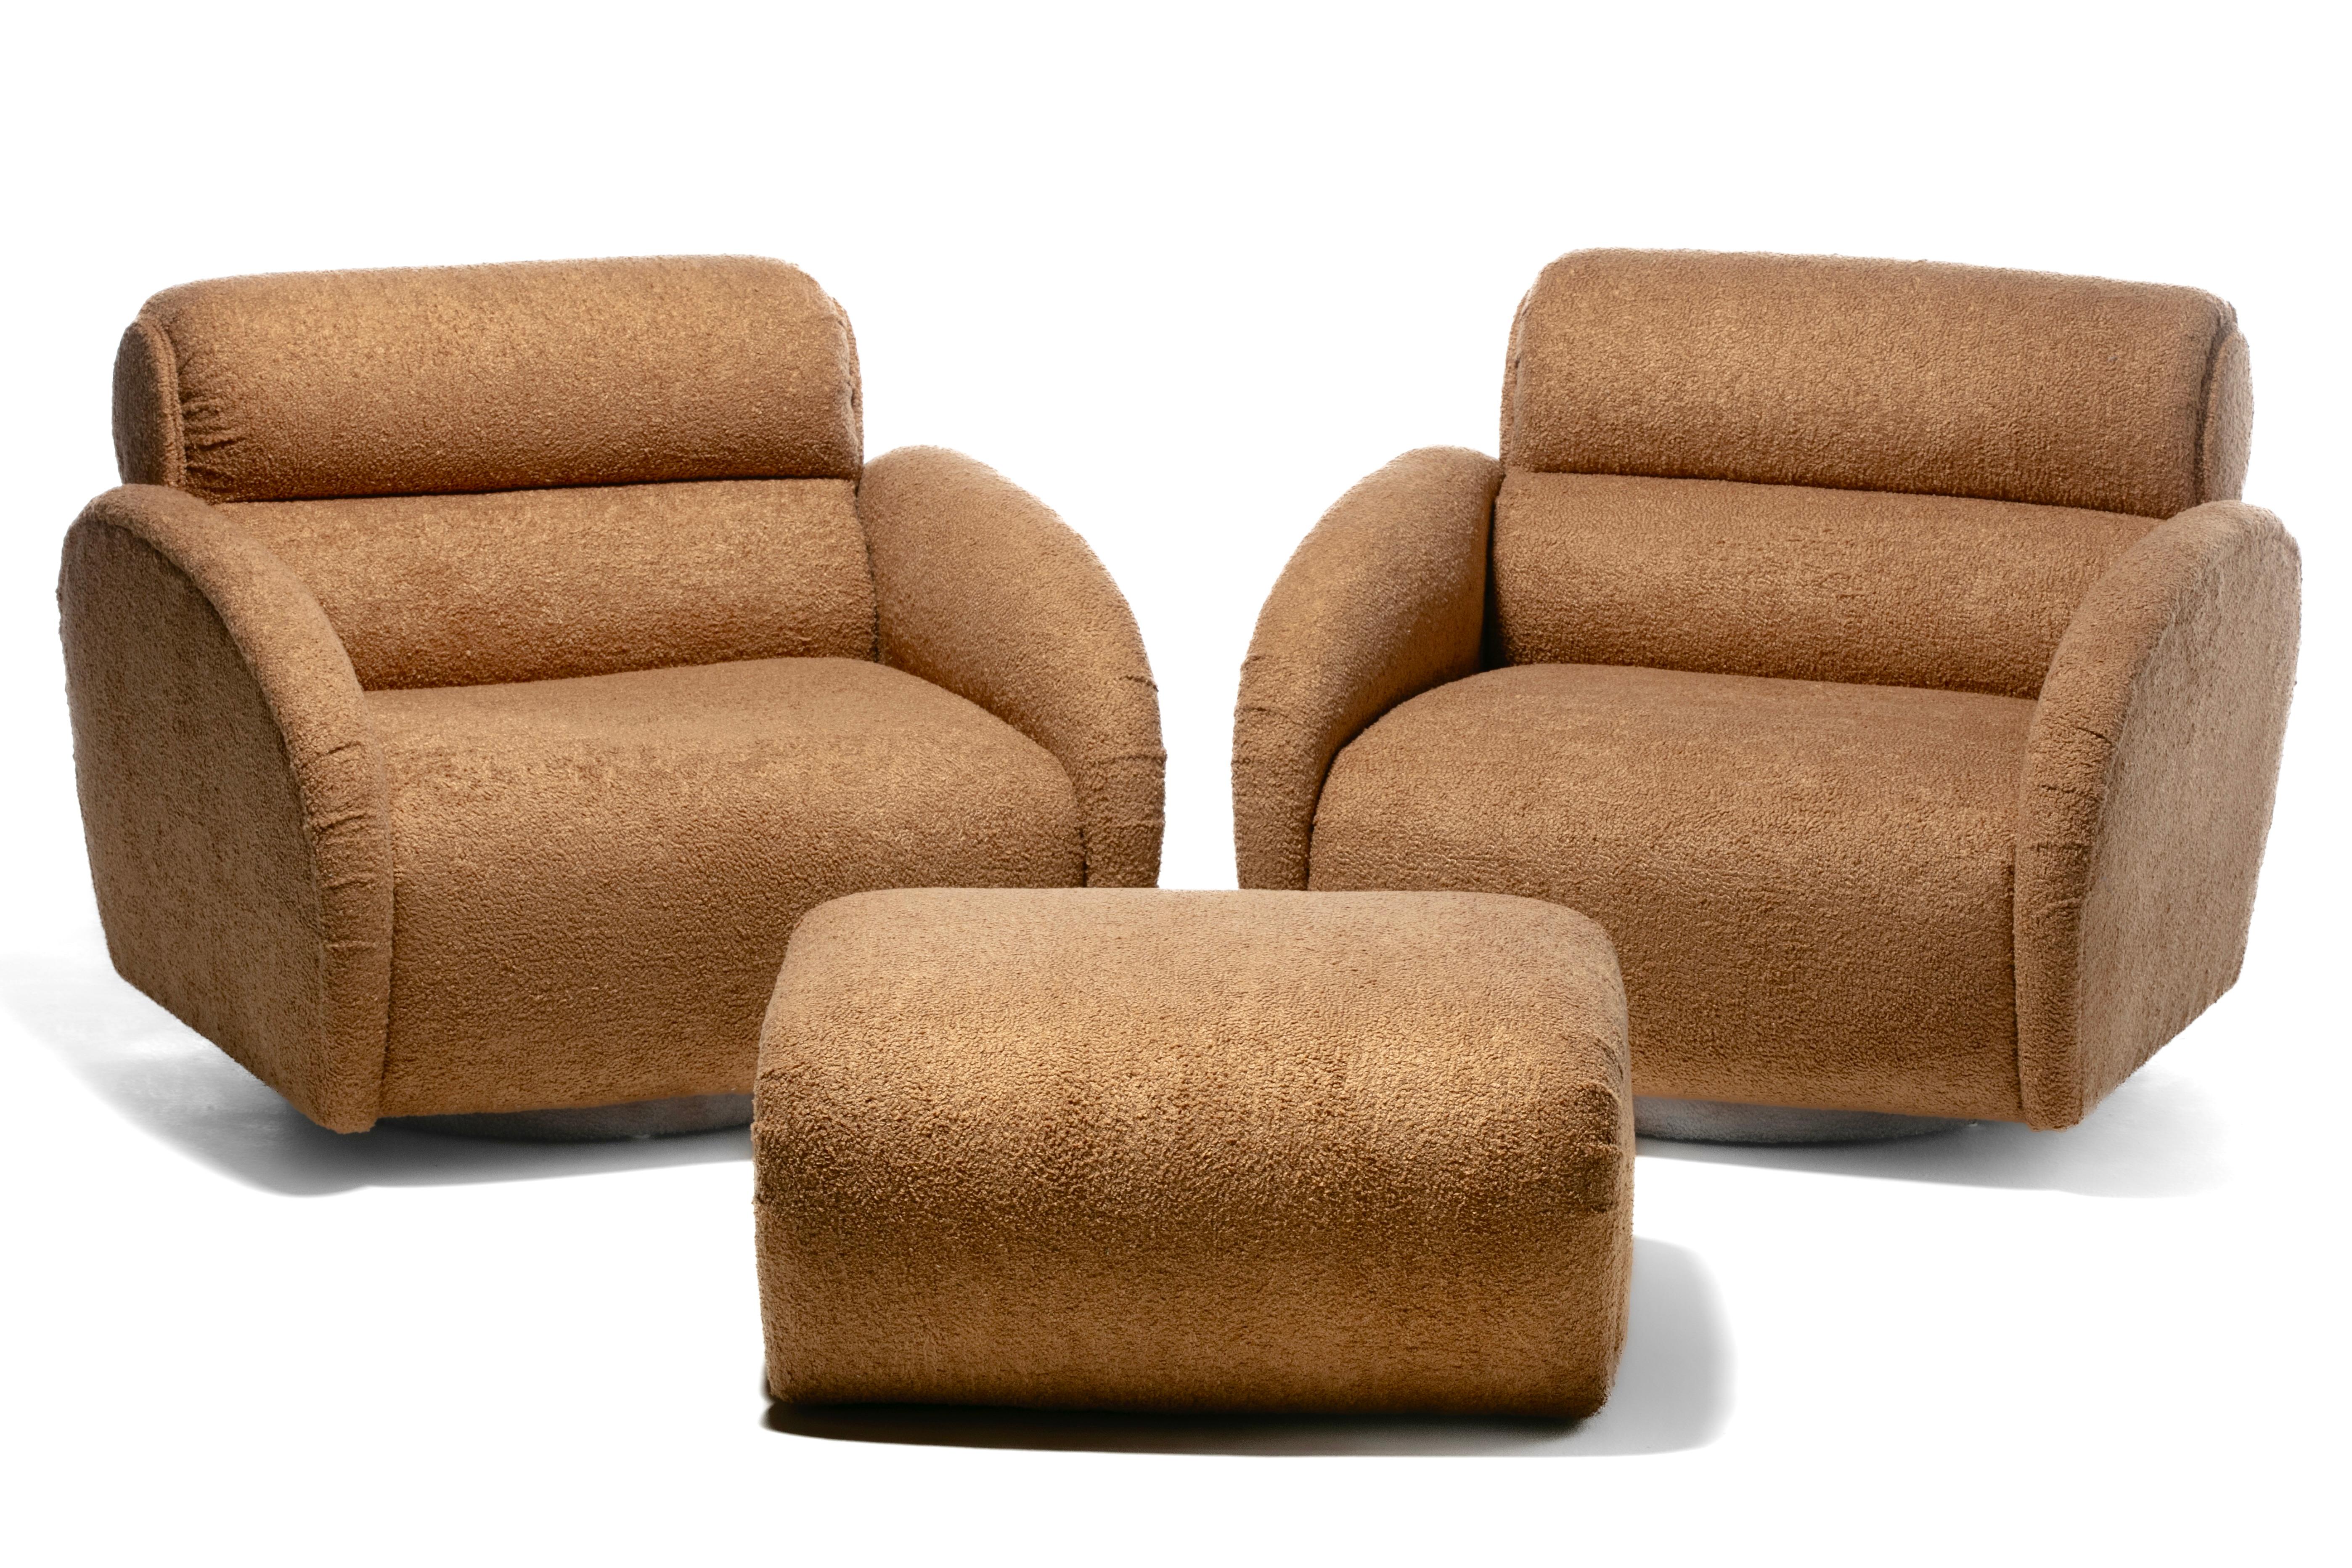 Stretch out and then some in these luxurious extra large Post Modern Directional Swivel Chairs newly professionally reupholstered in glimmering Mocha textured fabric. That side profile is killer. Major Modern Throne Chair. Attention buyers and